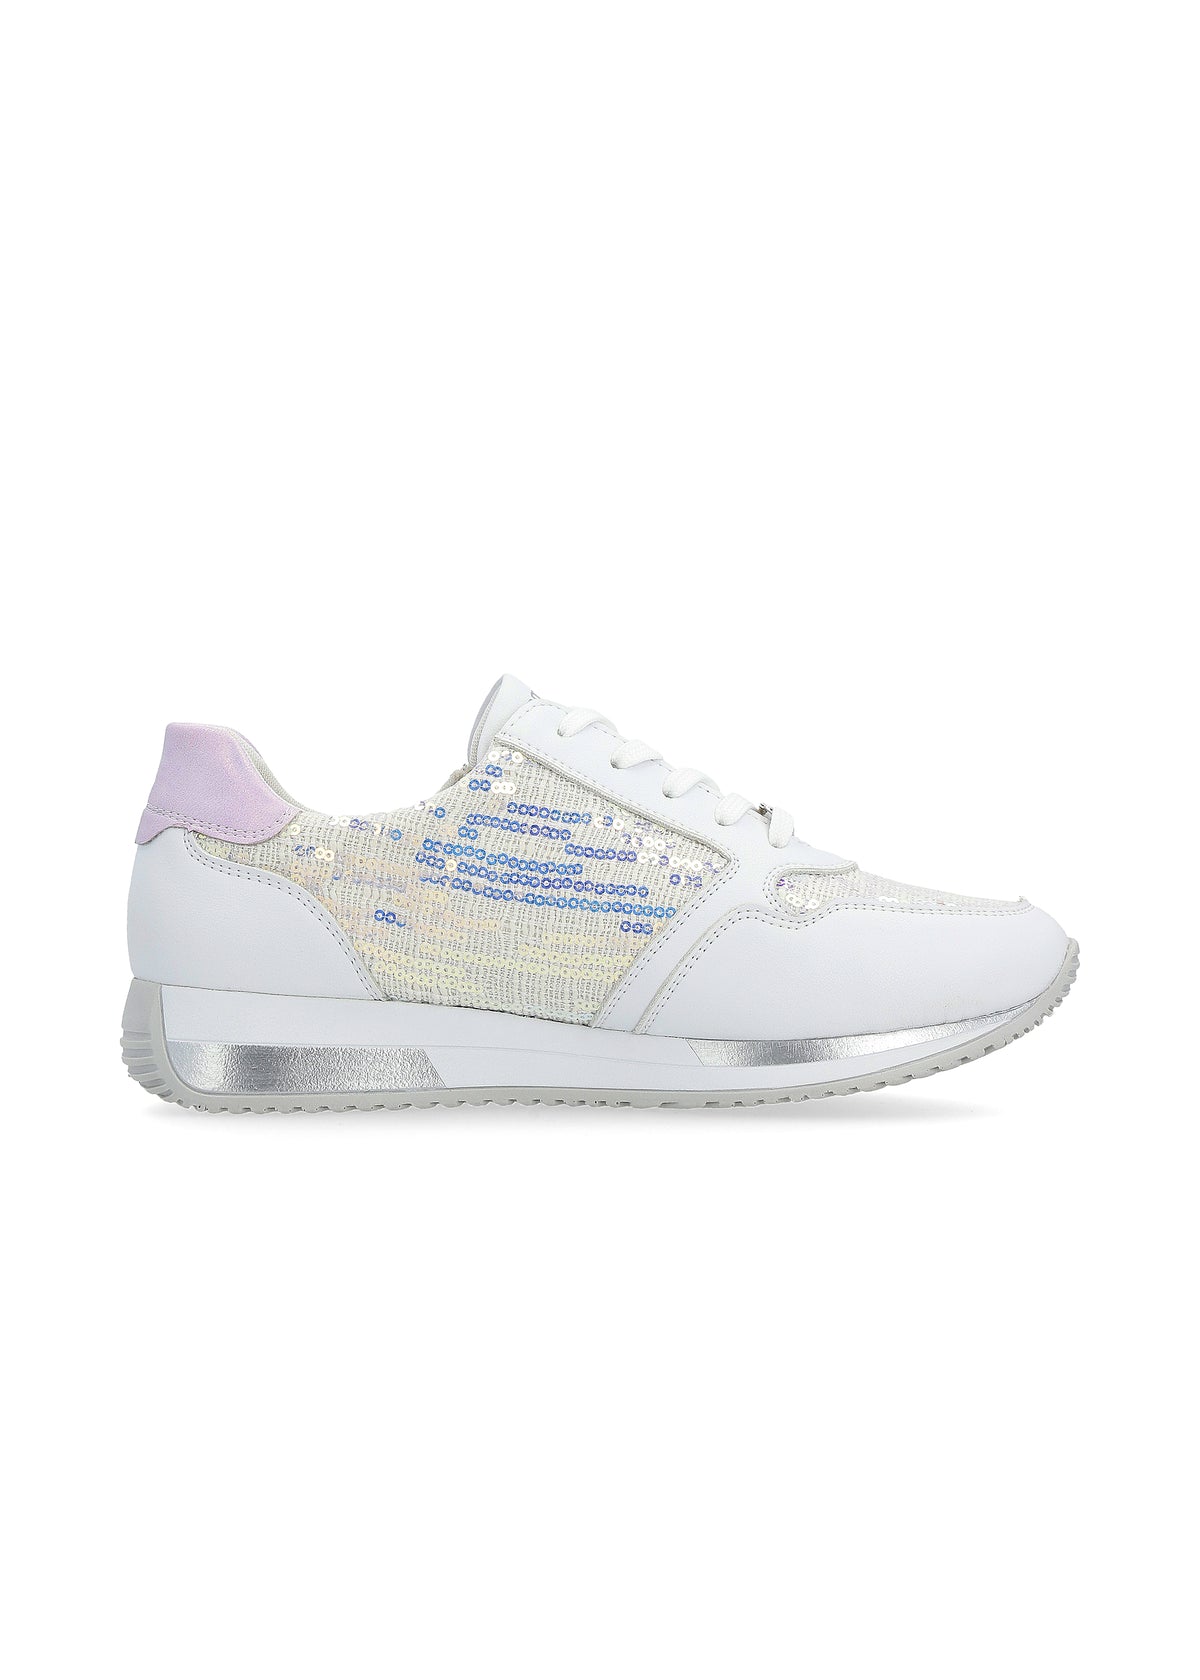 Sneakers with a small wedge sole - light pastel shades, sequins, vegan